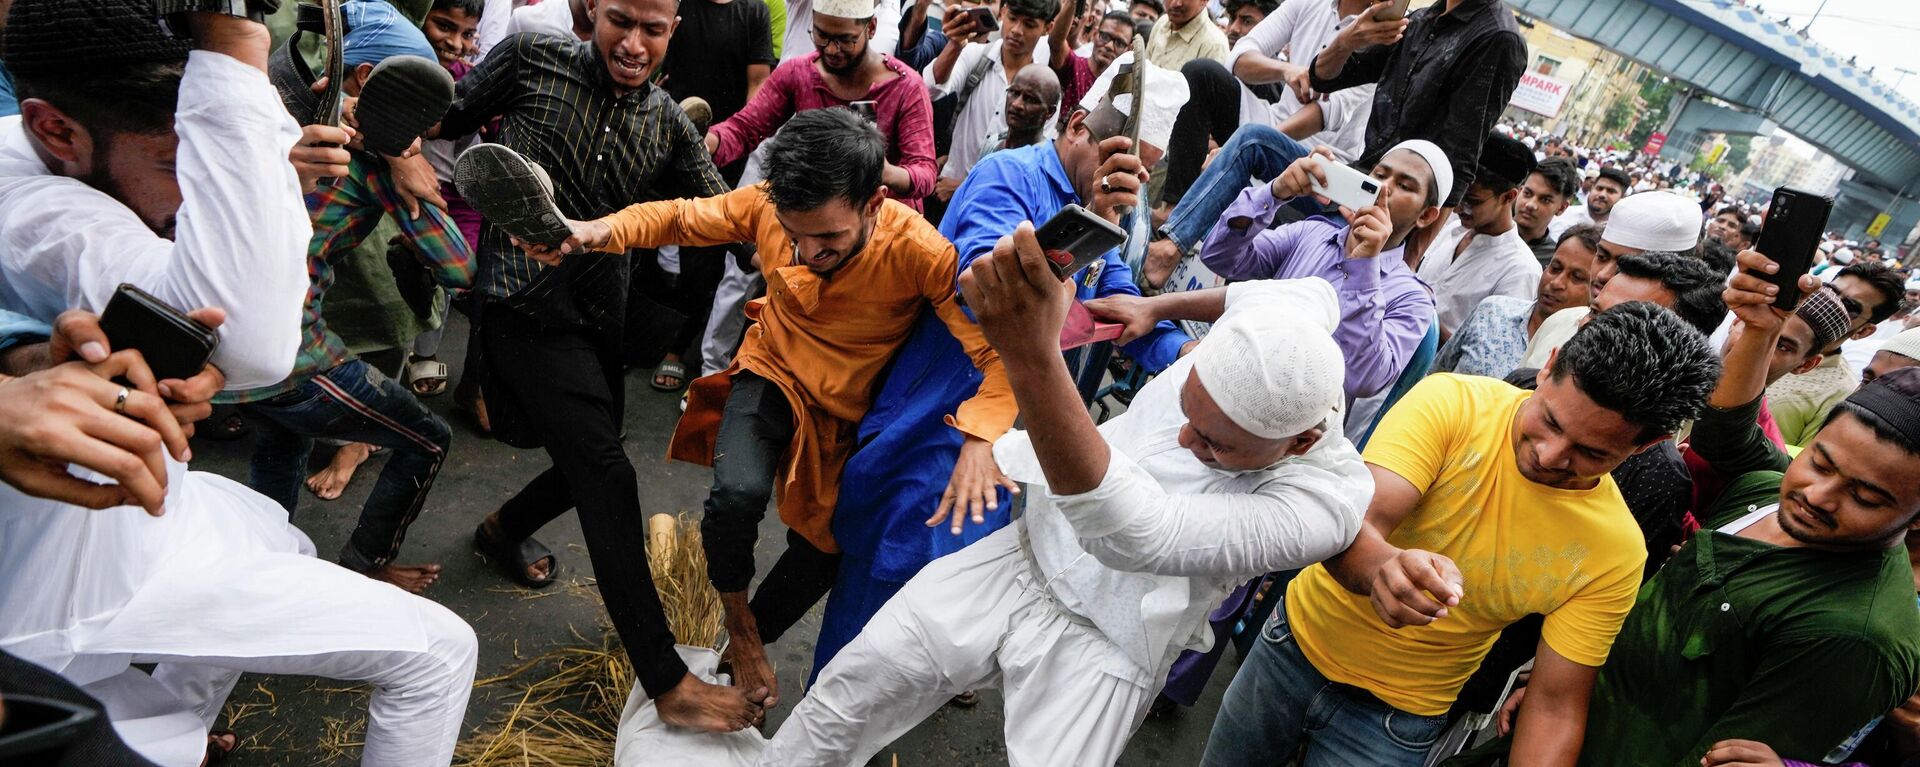 Indian Muslims trample an effigy of Nupur Sharma, the spokesperson of governing Hindu nationalist party as they react to the derogatory references to Islam and the Prophet Muhammad in Kolkata, India, Friday, June 10, 2022 - Sputnik International, 1920, 13.06.2022